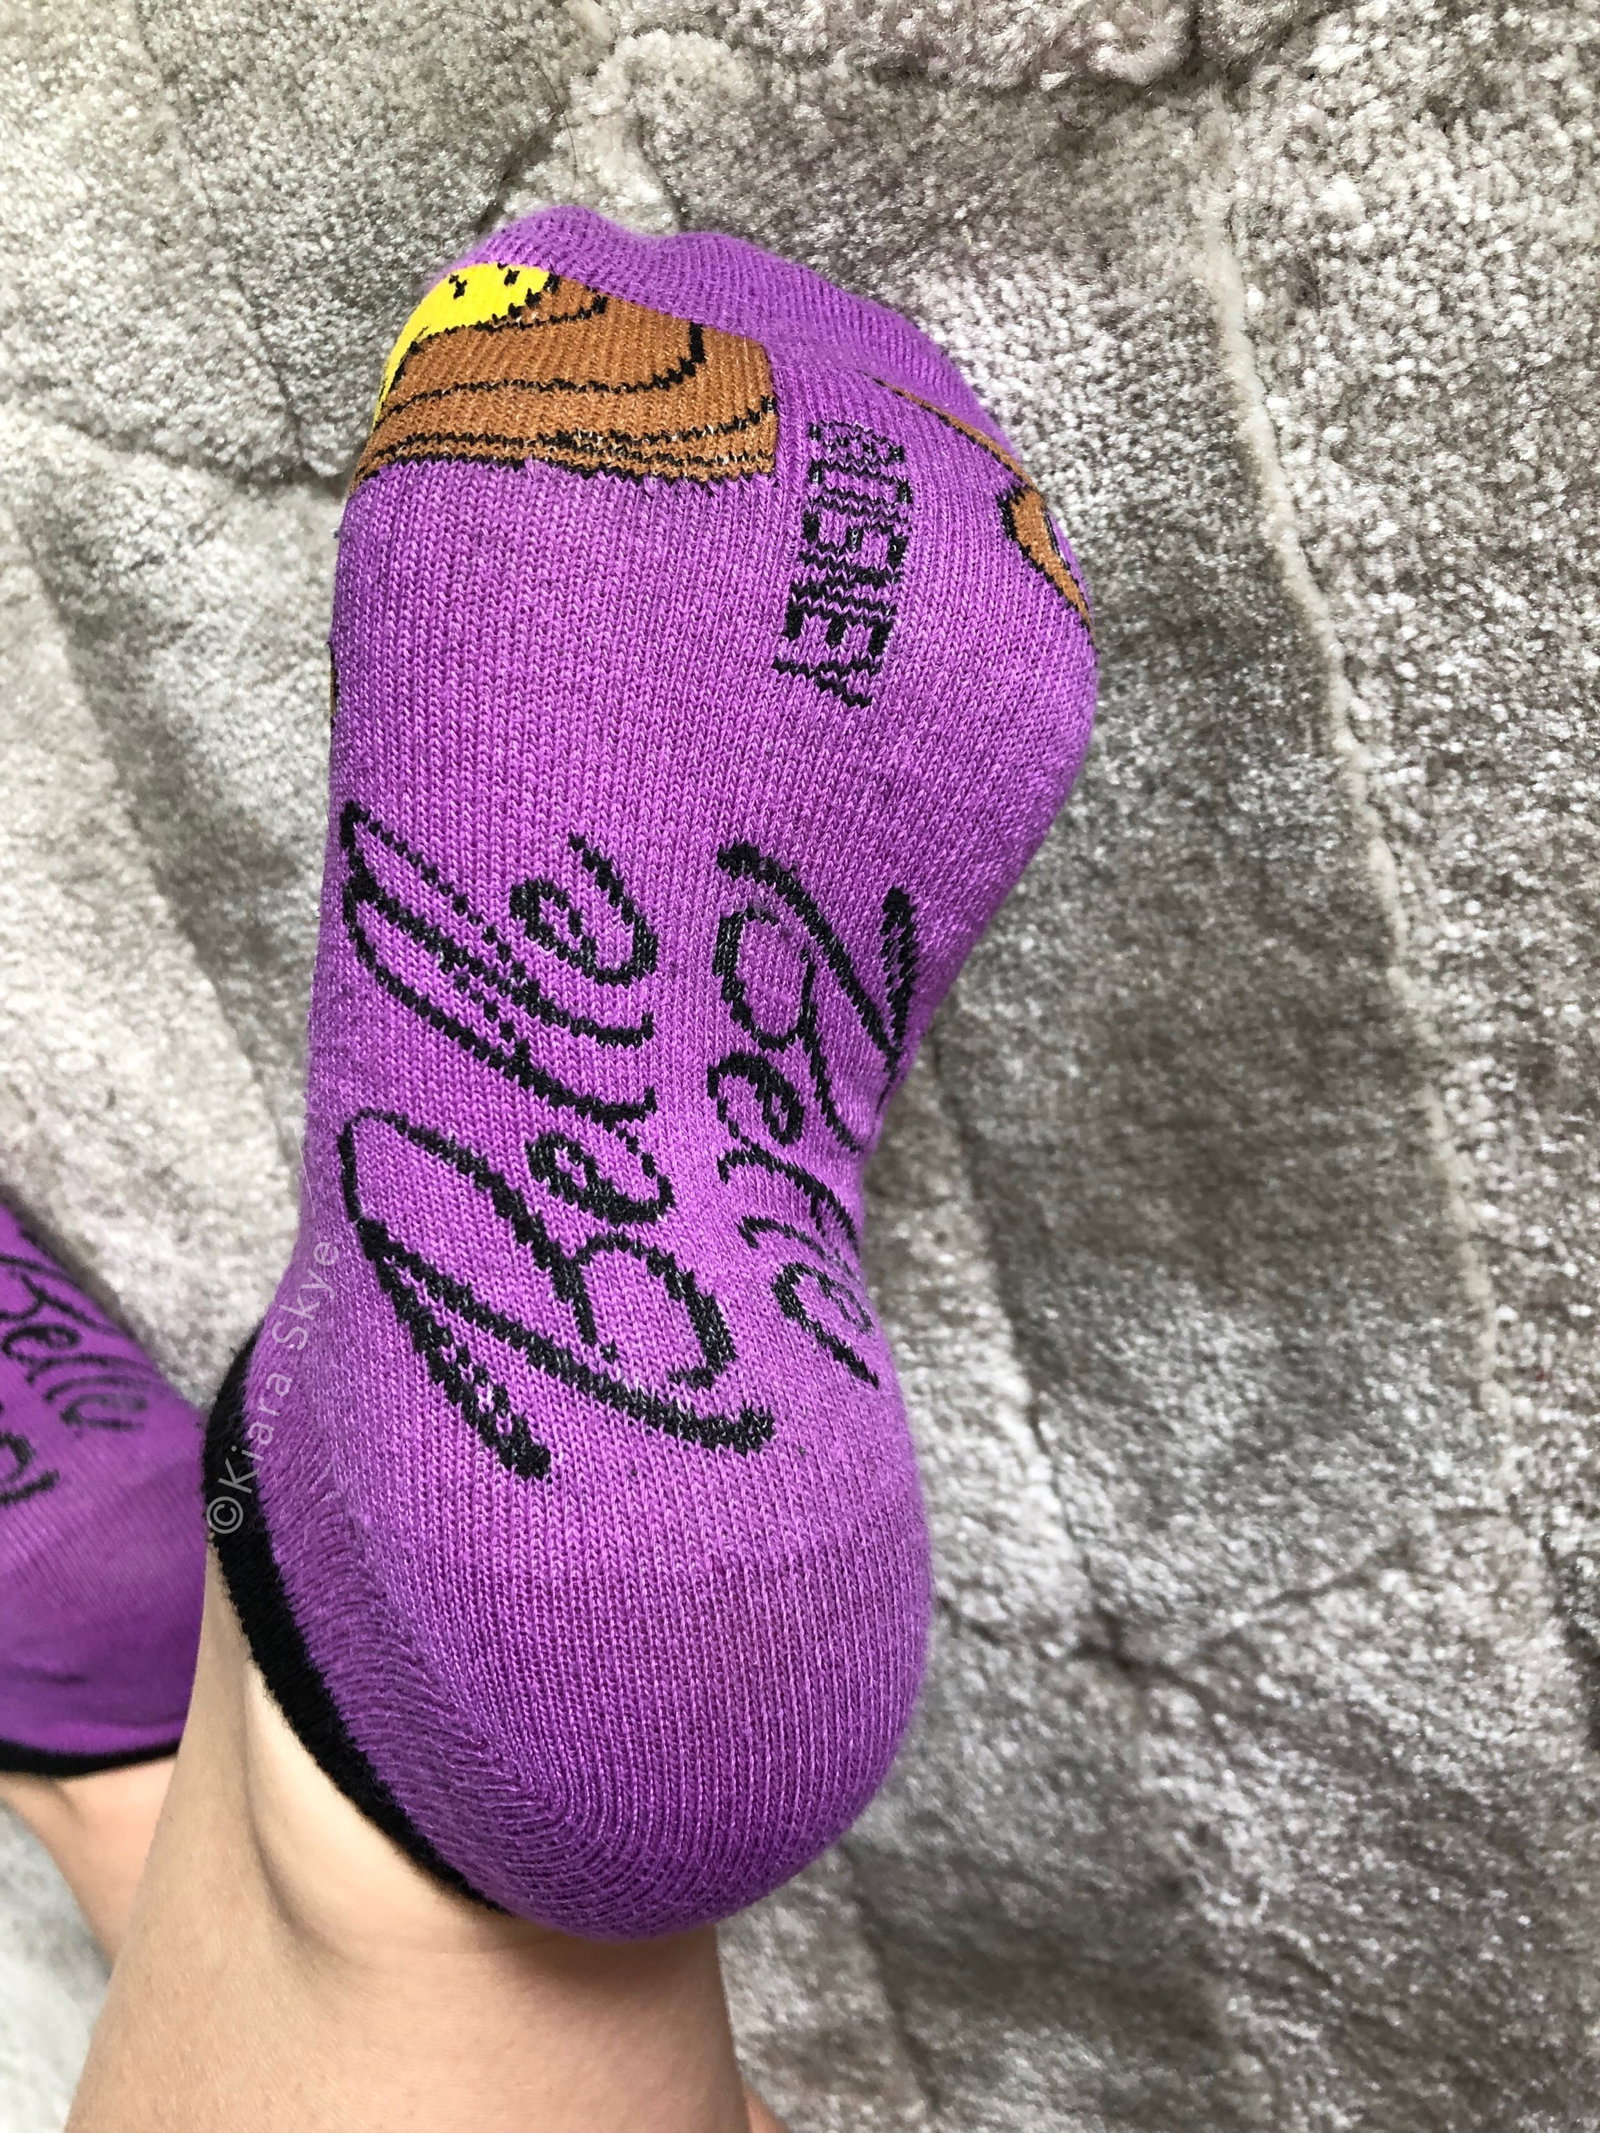 Watch the Photo by Kiara Skye with the username @KiaraSkye, who is a star user, posted on March 23, 2019. The post is about the topic Hot Girls in Socks. and the text says '💦NEW #SOCK AUCTION!💦
➡️CLICK HERE: http://www.ebanned.net/cgi-bin/auction/auction.cgi?category=wclothing23&item=1554037579 

#wornitems #wornsocks #smellyfeet #smallfeet #stinkyfeet'